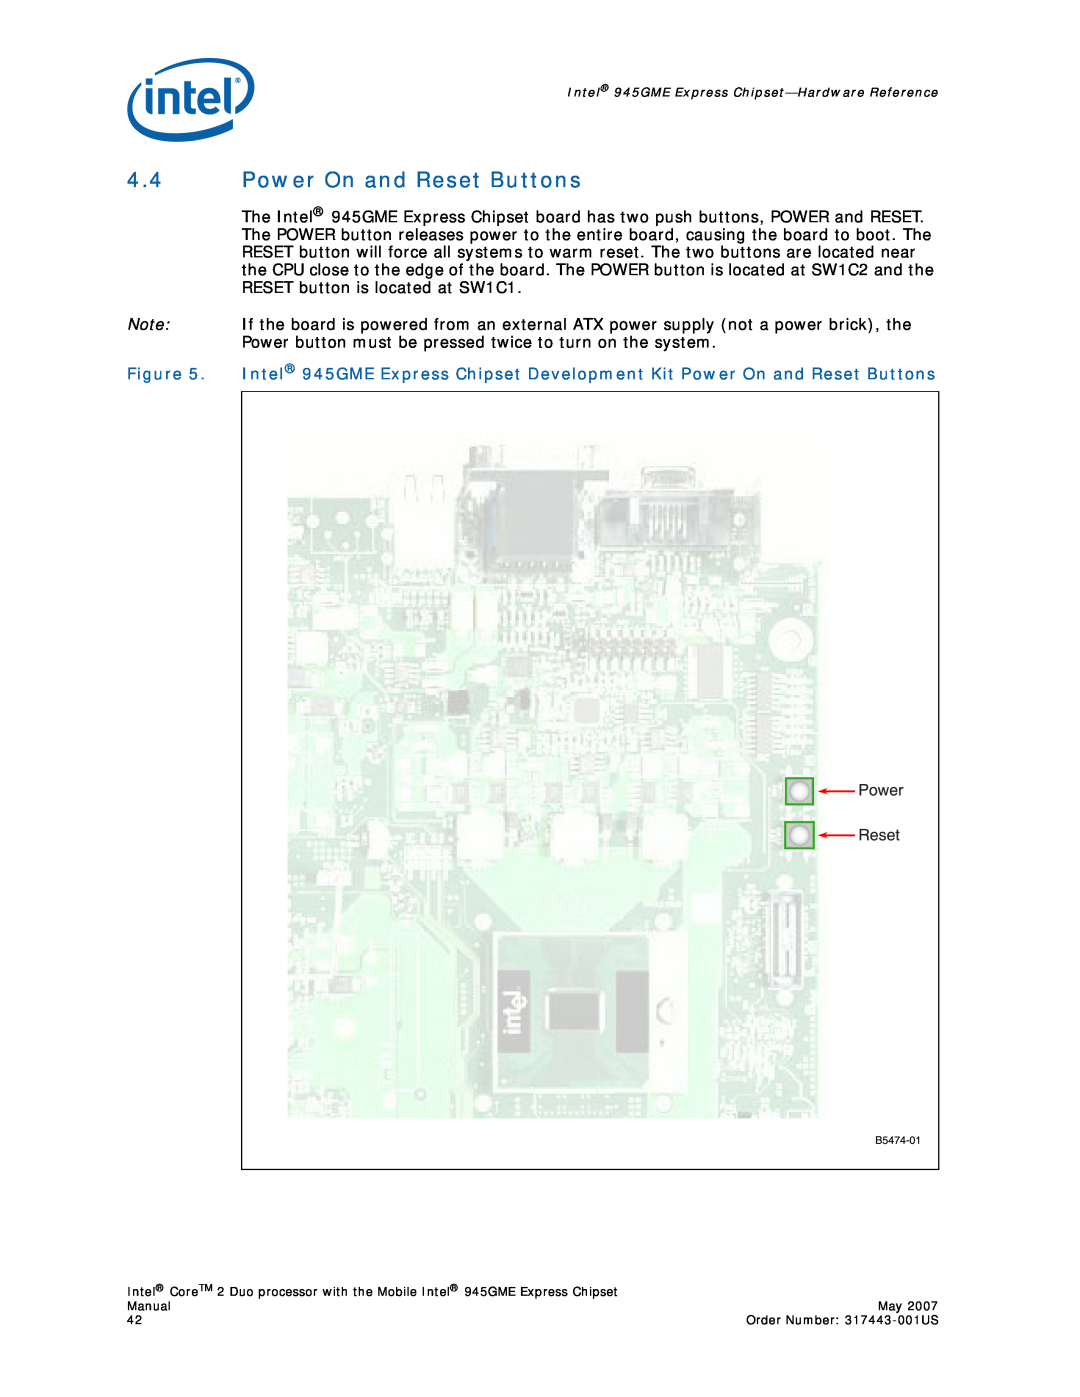 Intel 317443-001US user manual Power On and Reset Buttons 